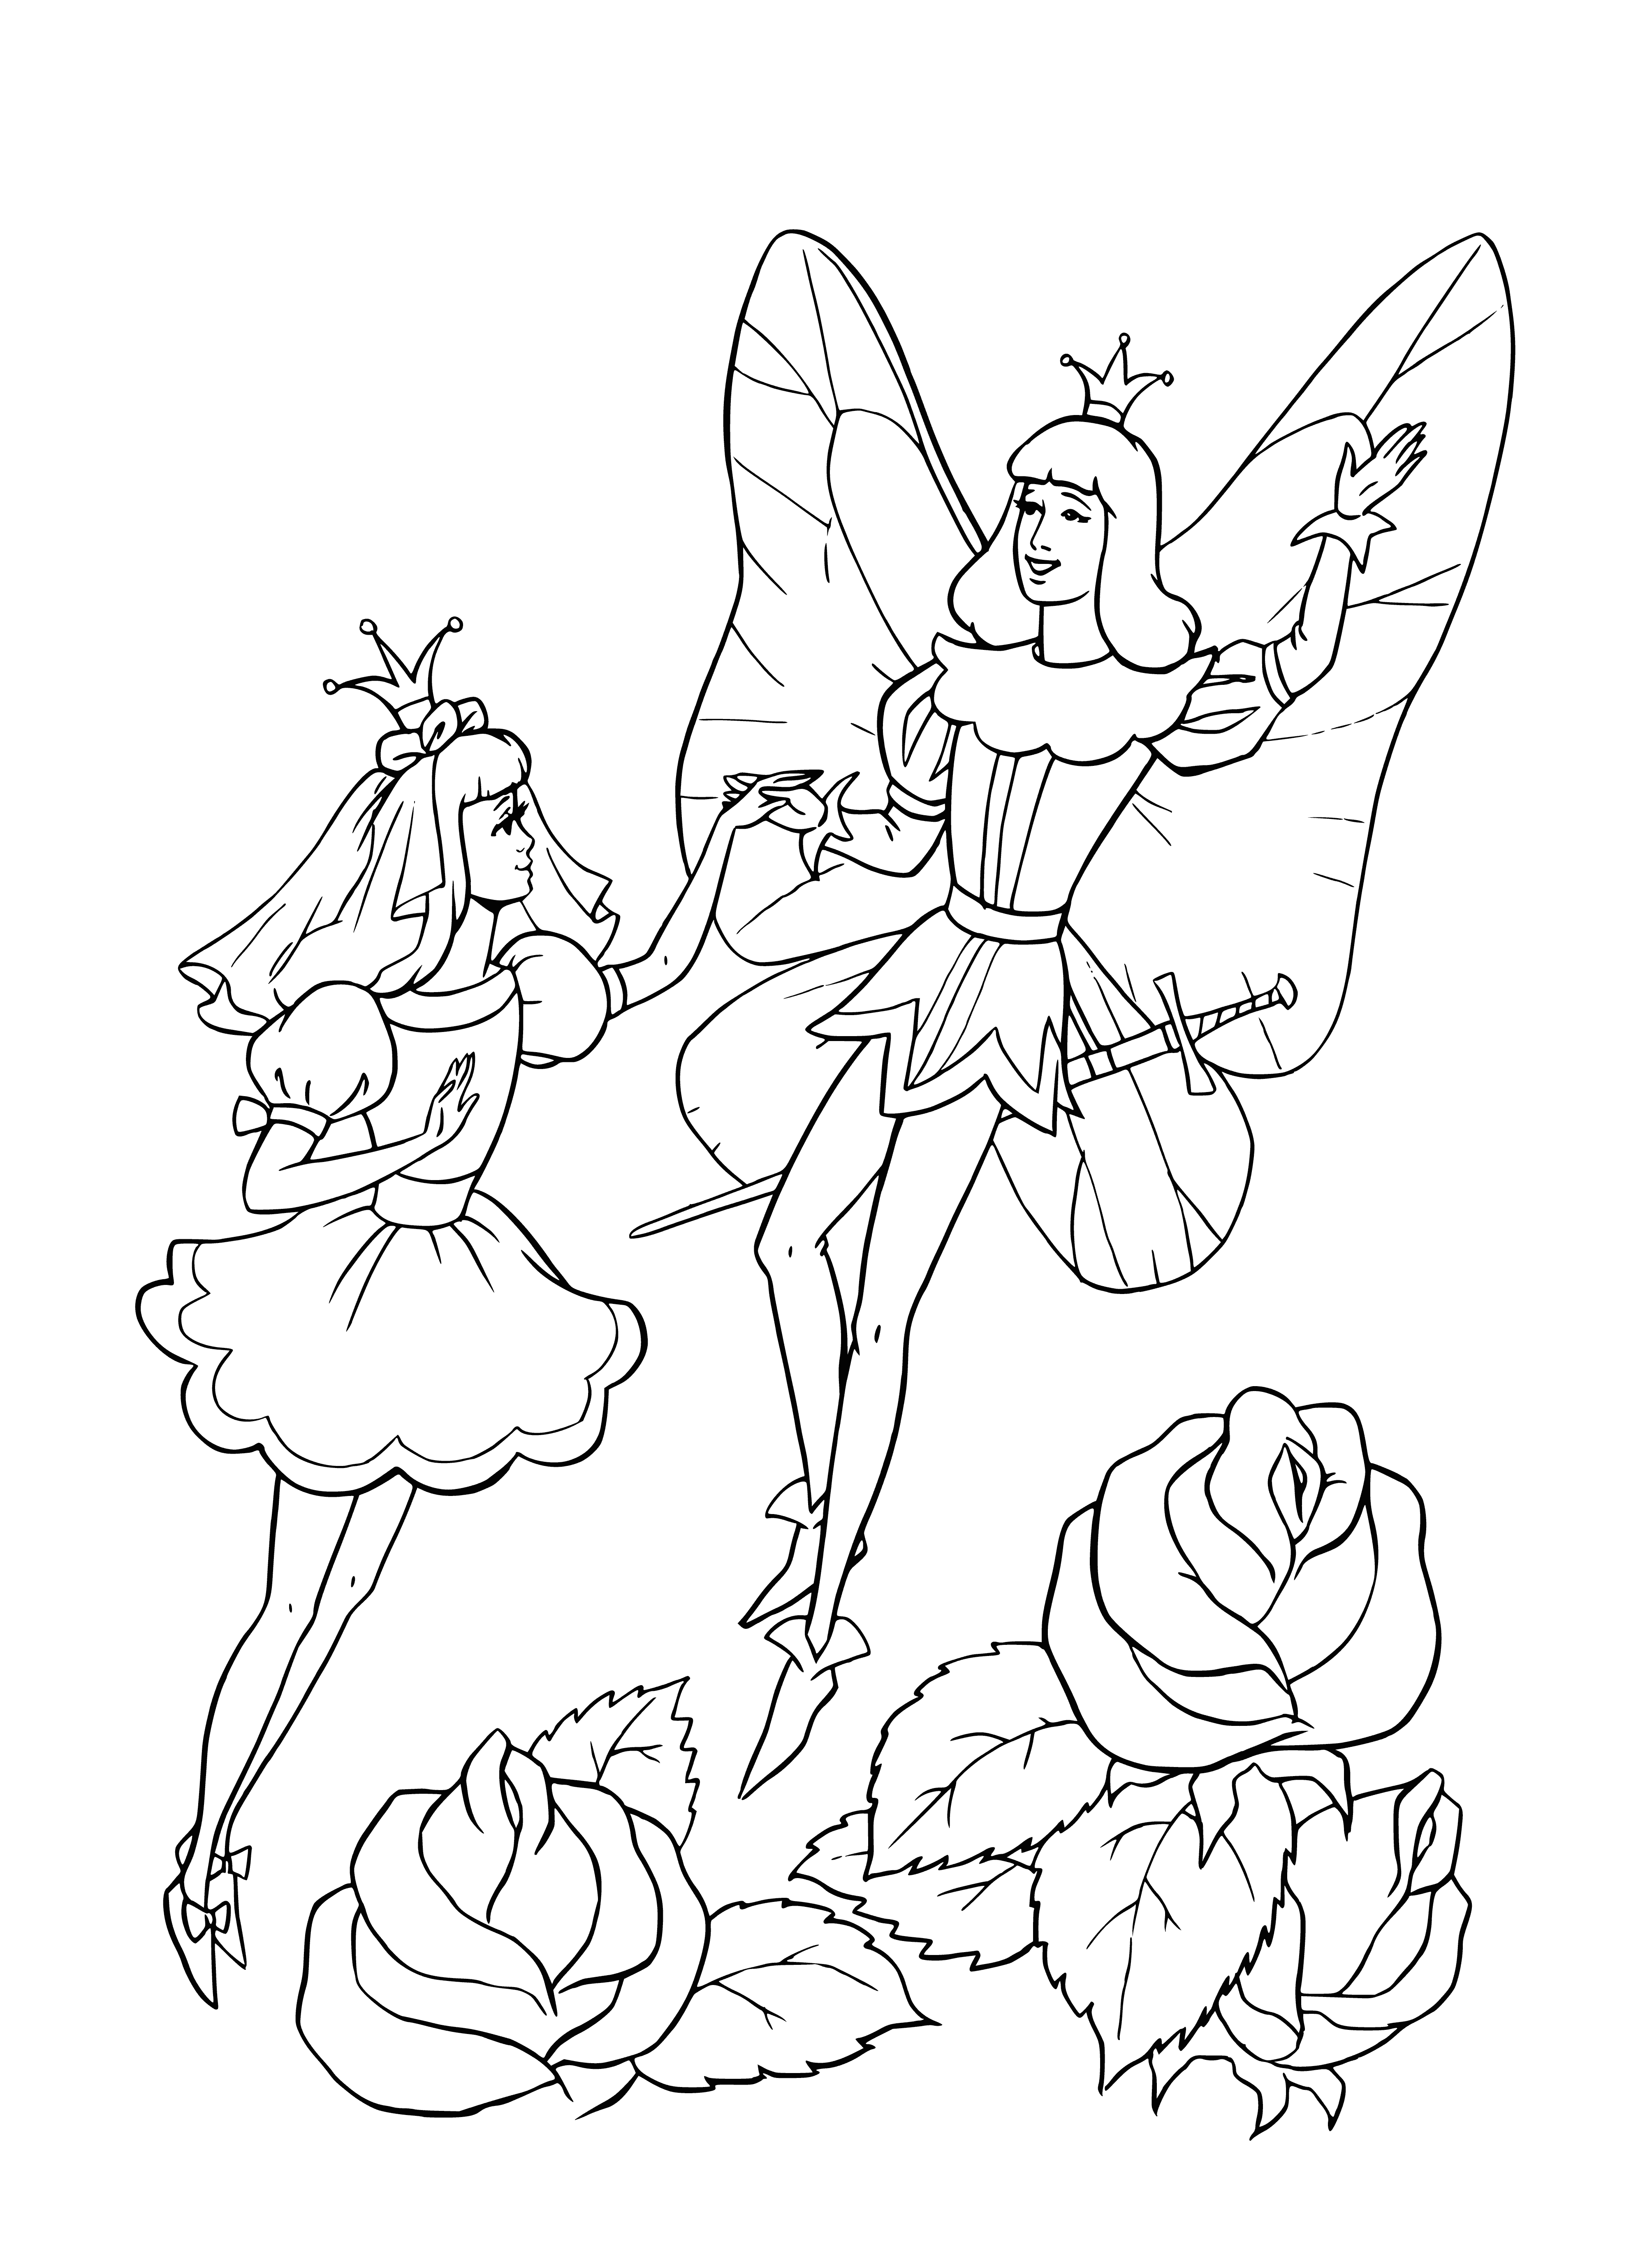 Thumbelina and the king of the elves coloring page